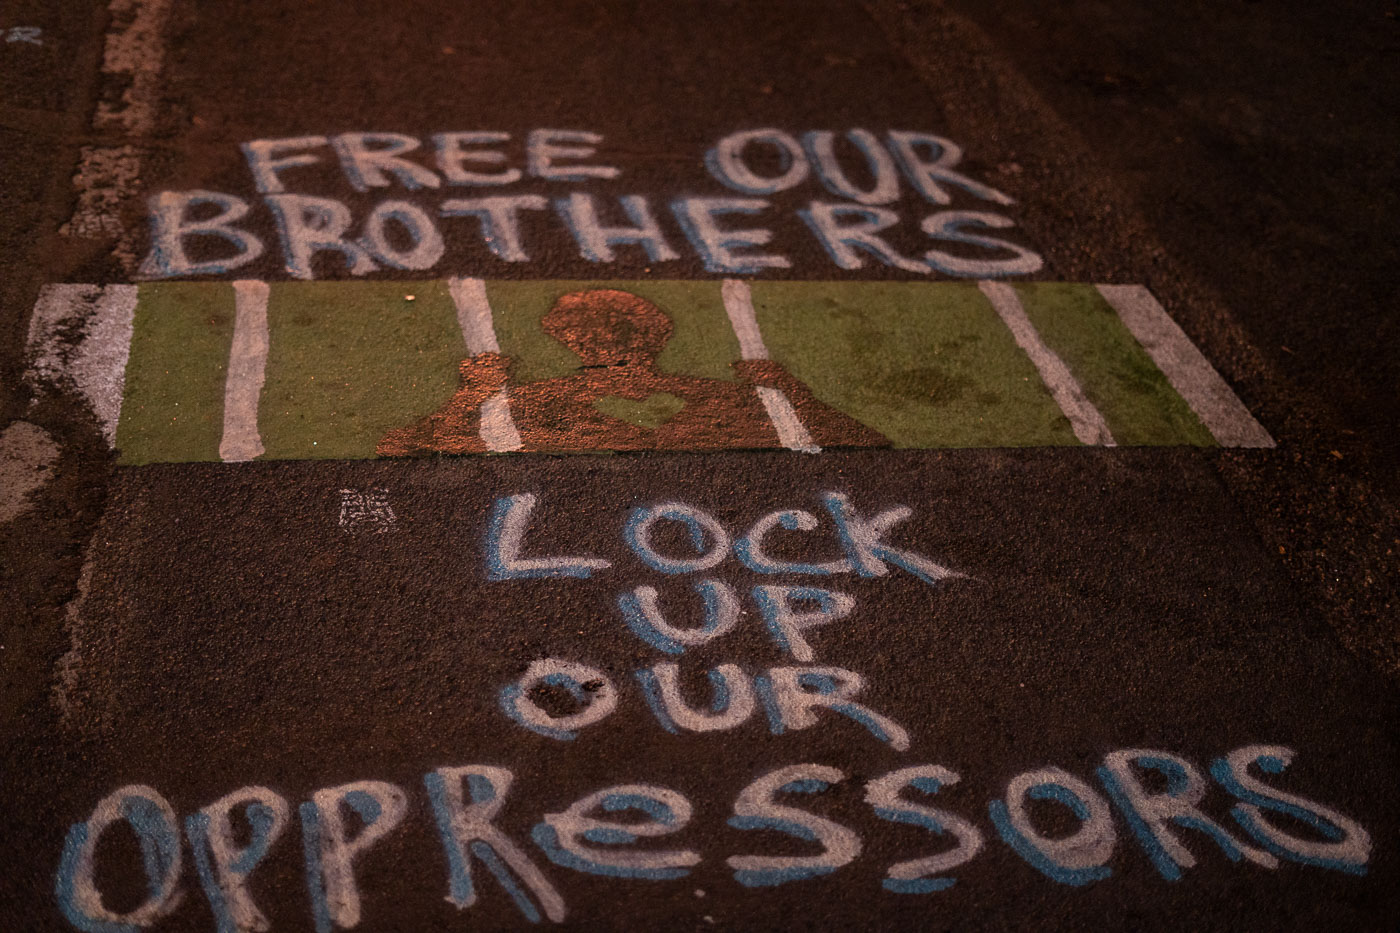 Free our brothers, Lock up our oppressors graffiti